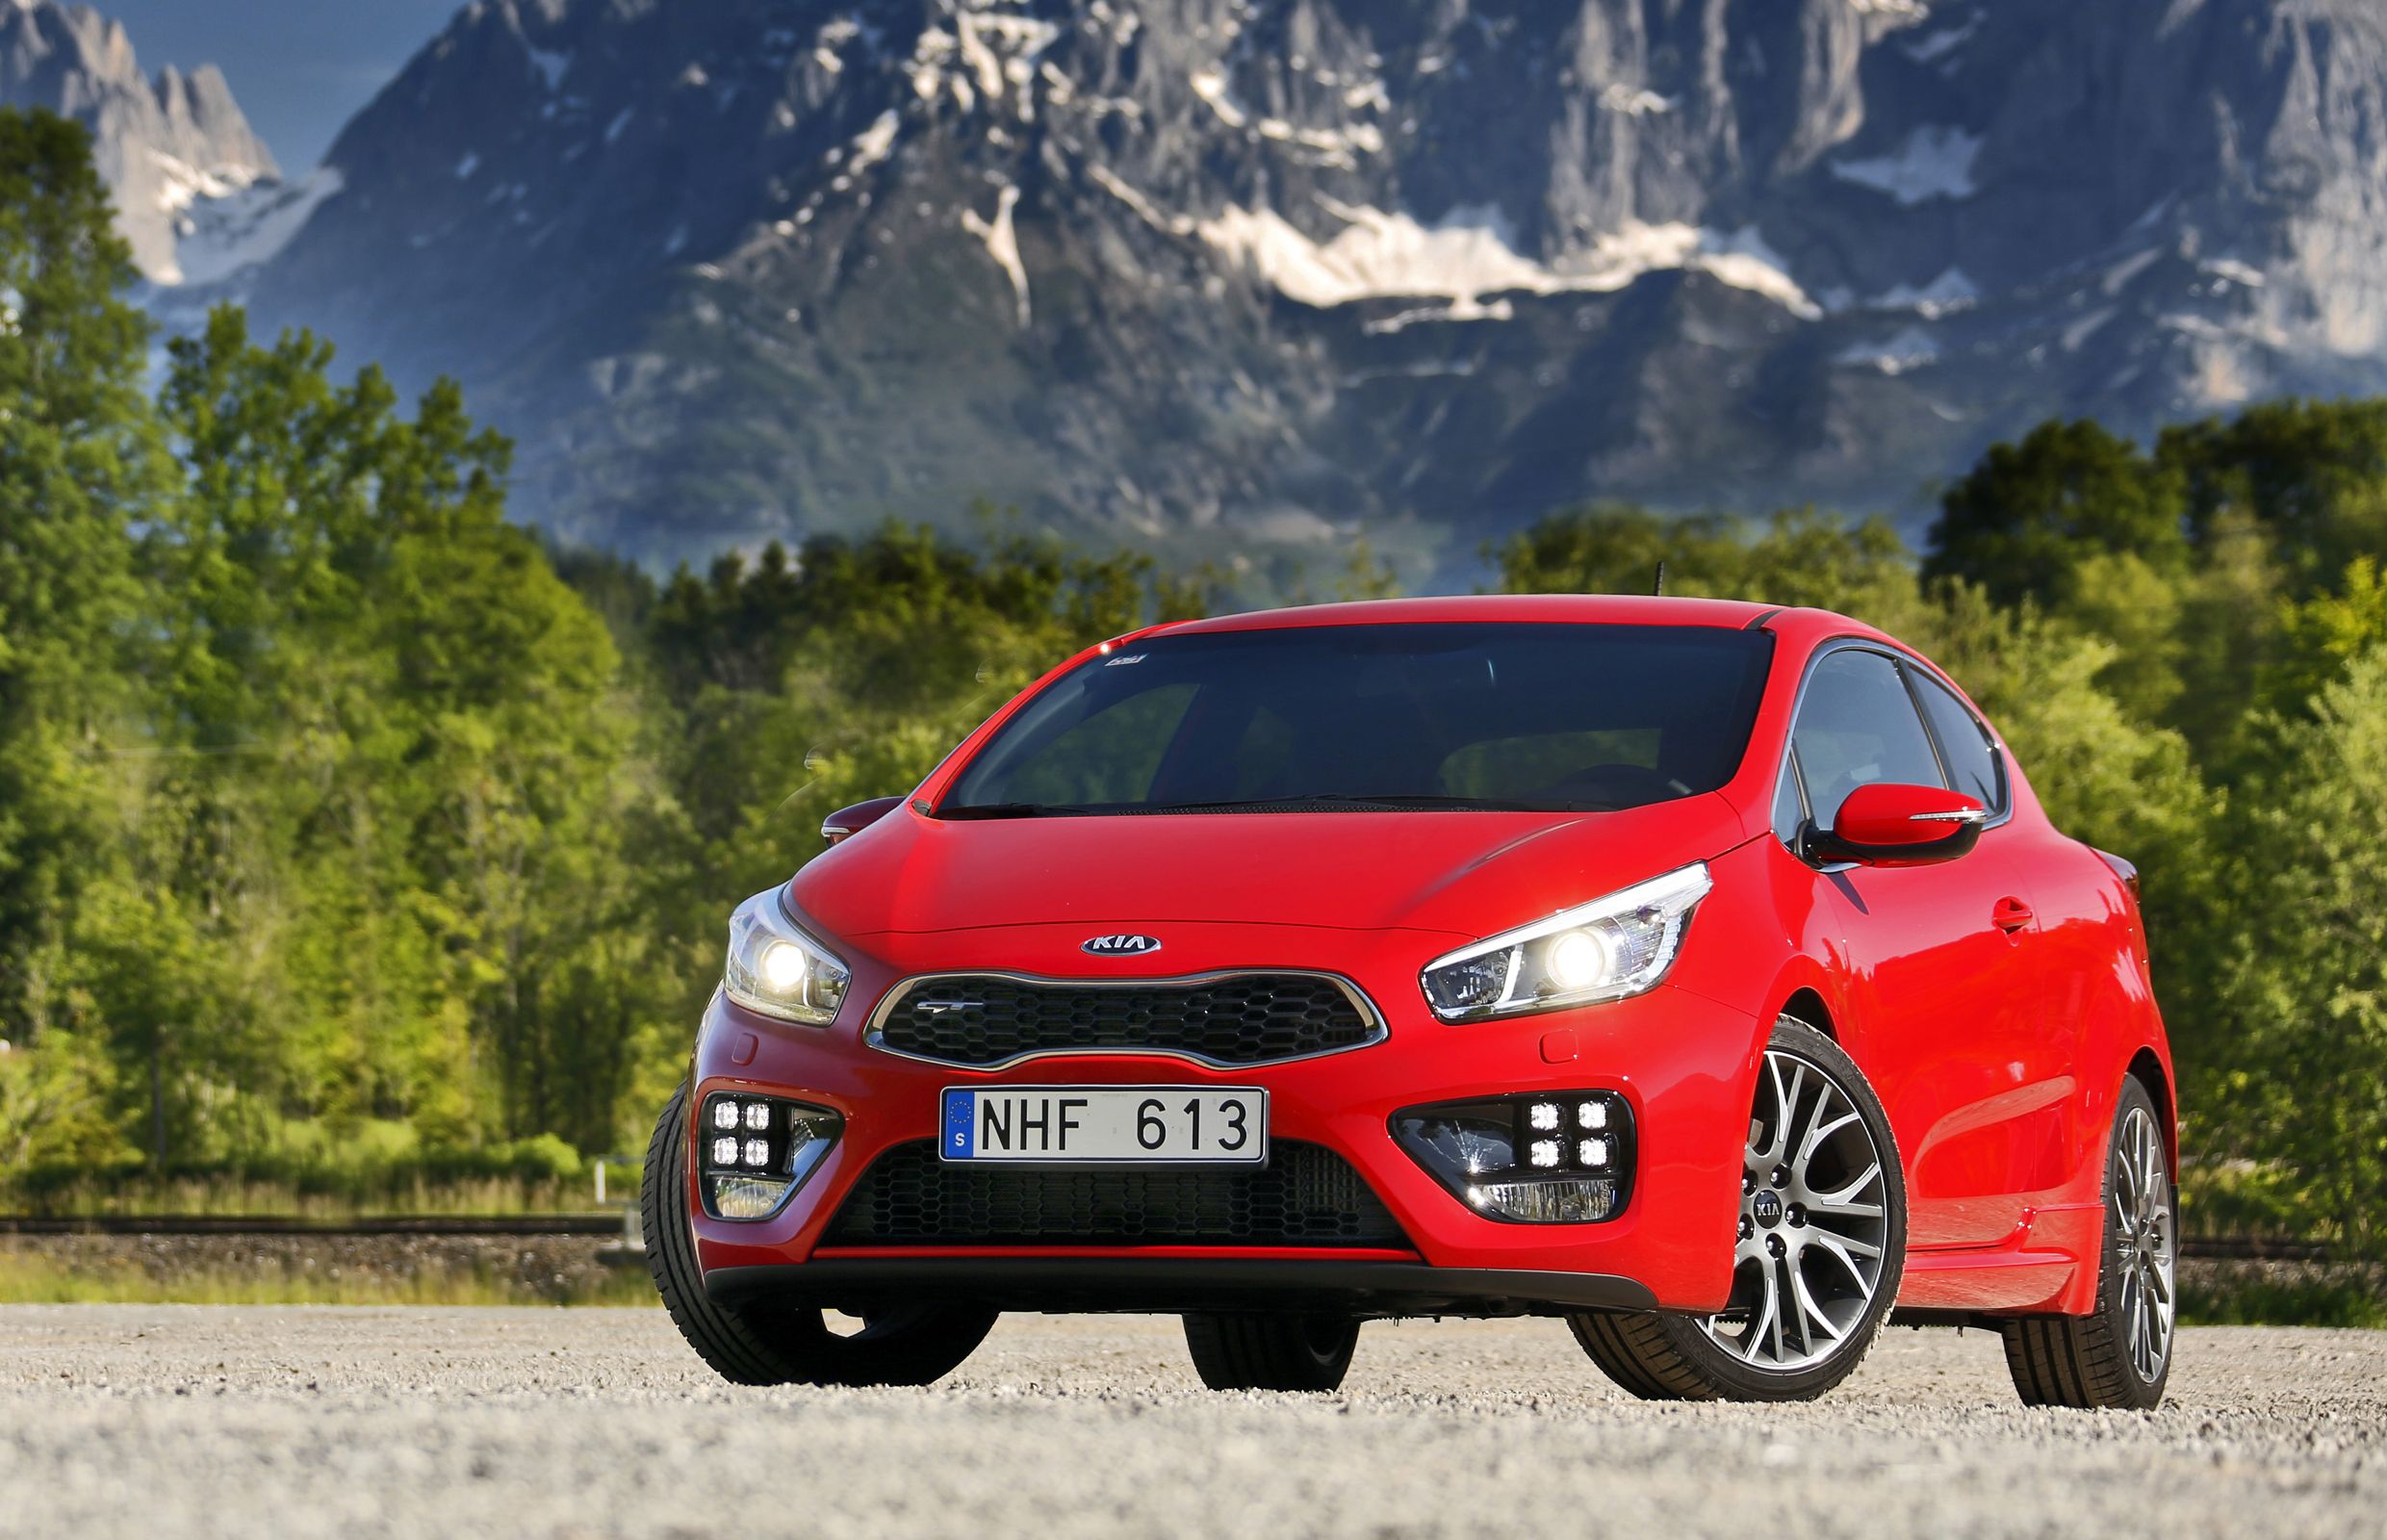 Kia wants to wake up its cars with more GT variants